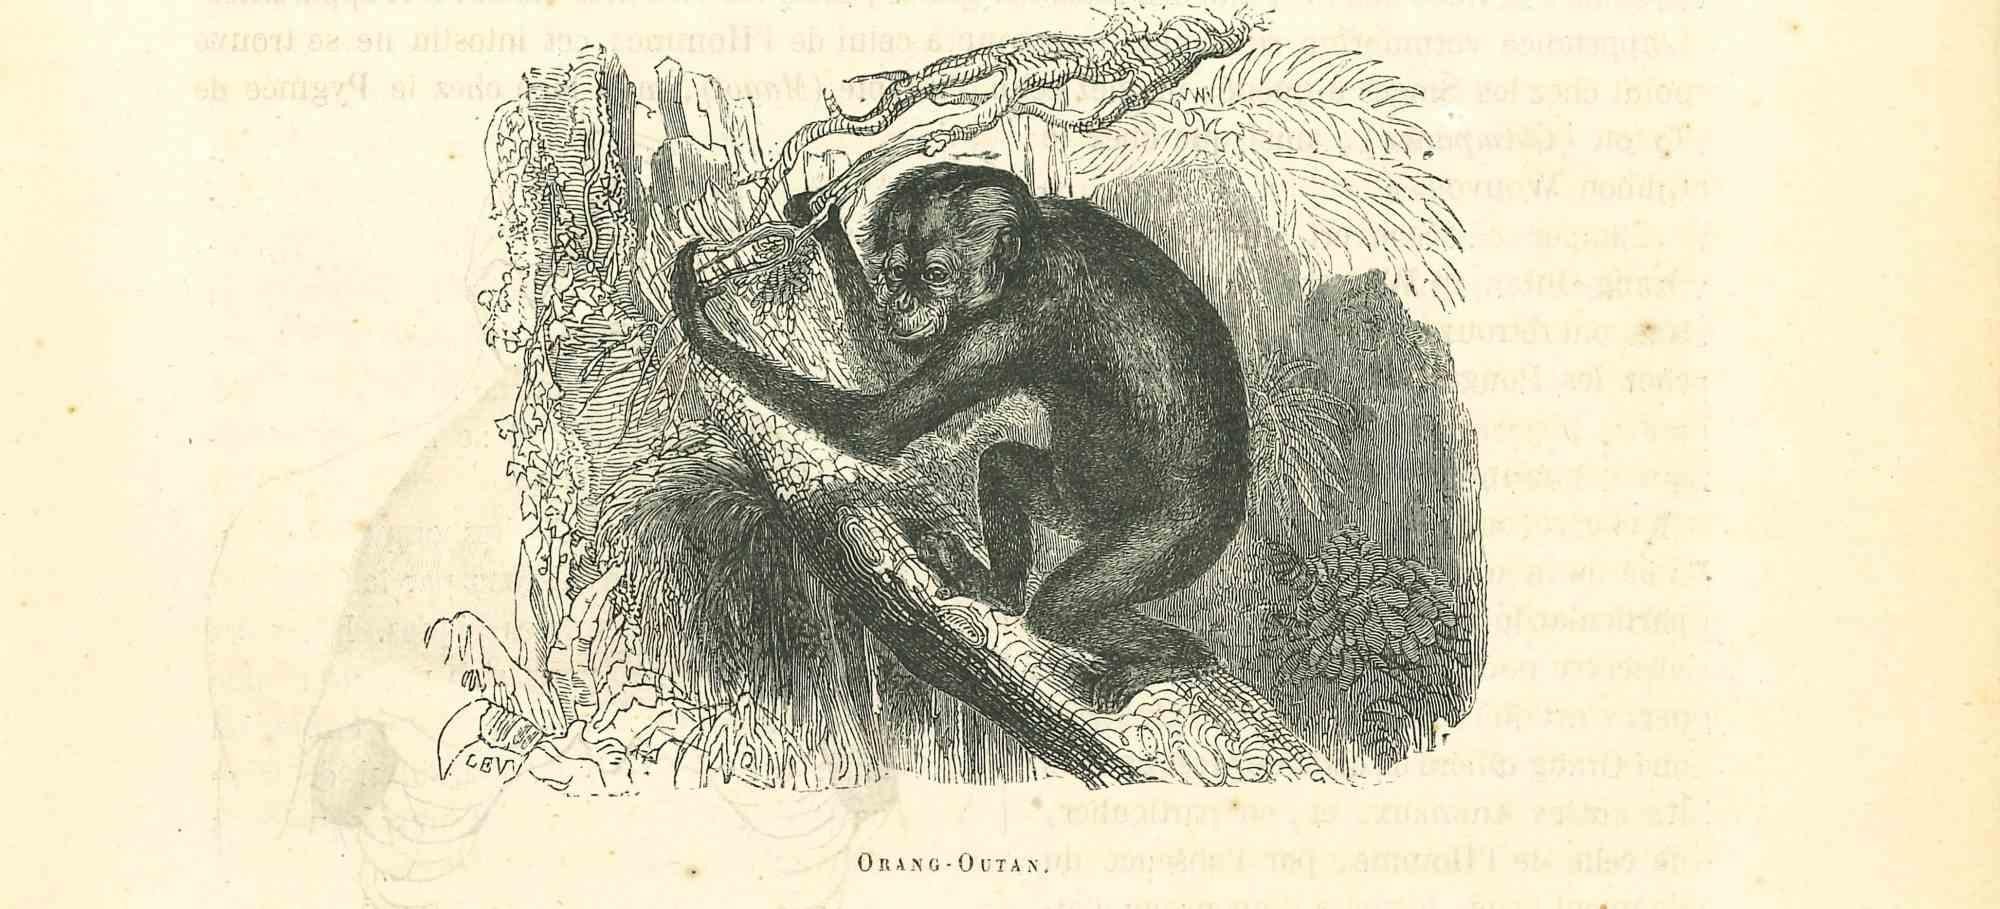 The Orangutan is an original lithograph on ivory-colored paper, realized by Paul Gervais (1816-1879). The artwork is from The Series of "Les Trois Règnes de la Nature", and was published in 1854.

Good conditions.

Titled on the lower. With the